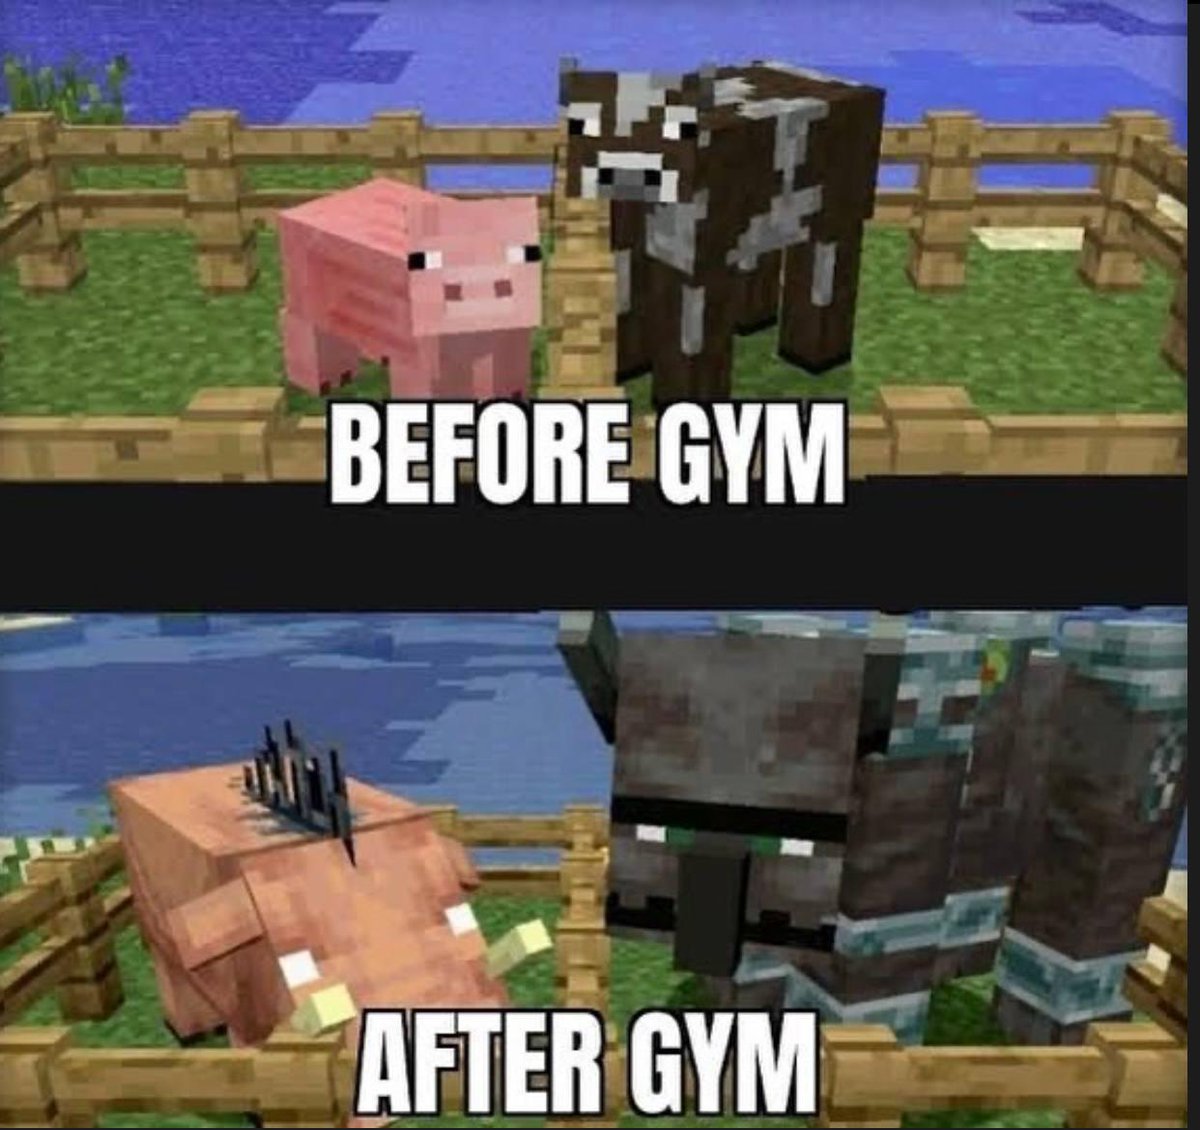 This meme legit motivated me to hit the gym today💀